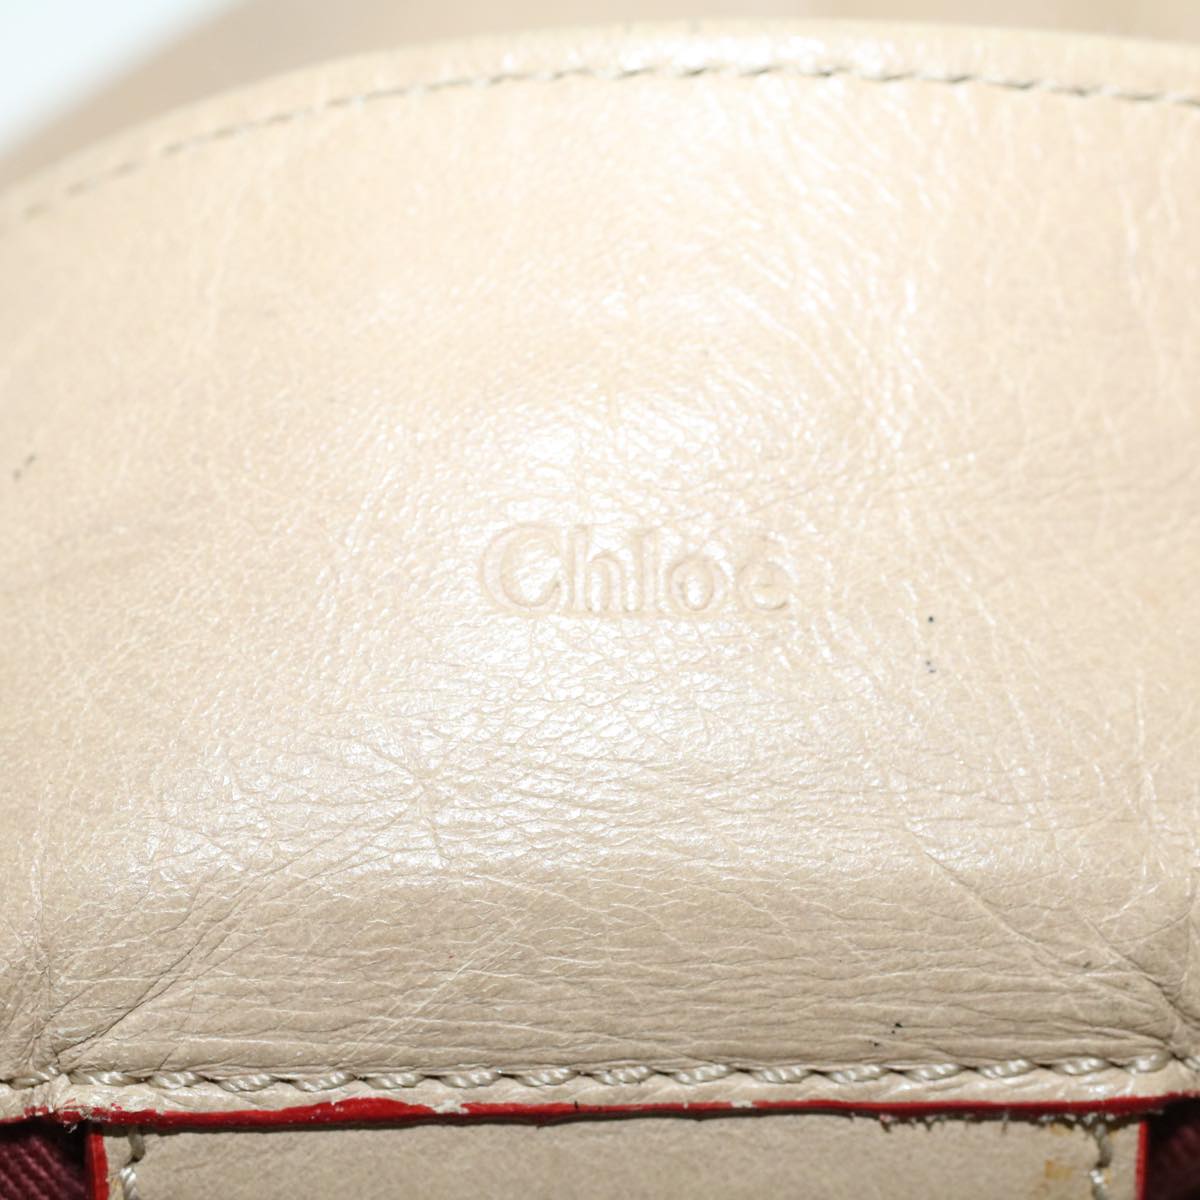 Chloe Victoria Hand Bag Leather Beige Auth bs6433